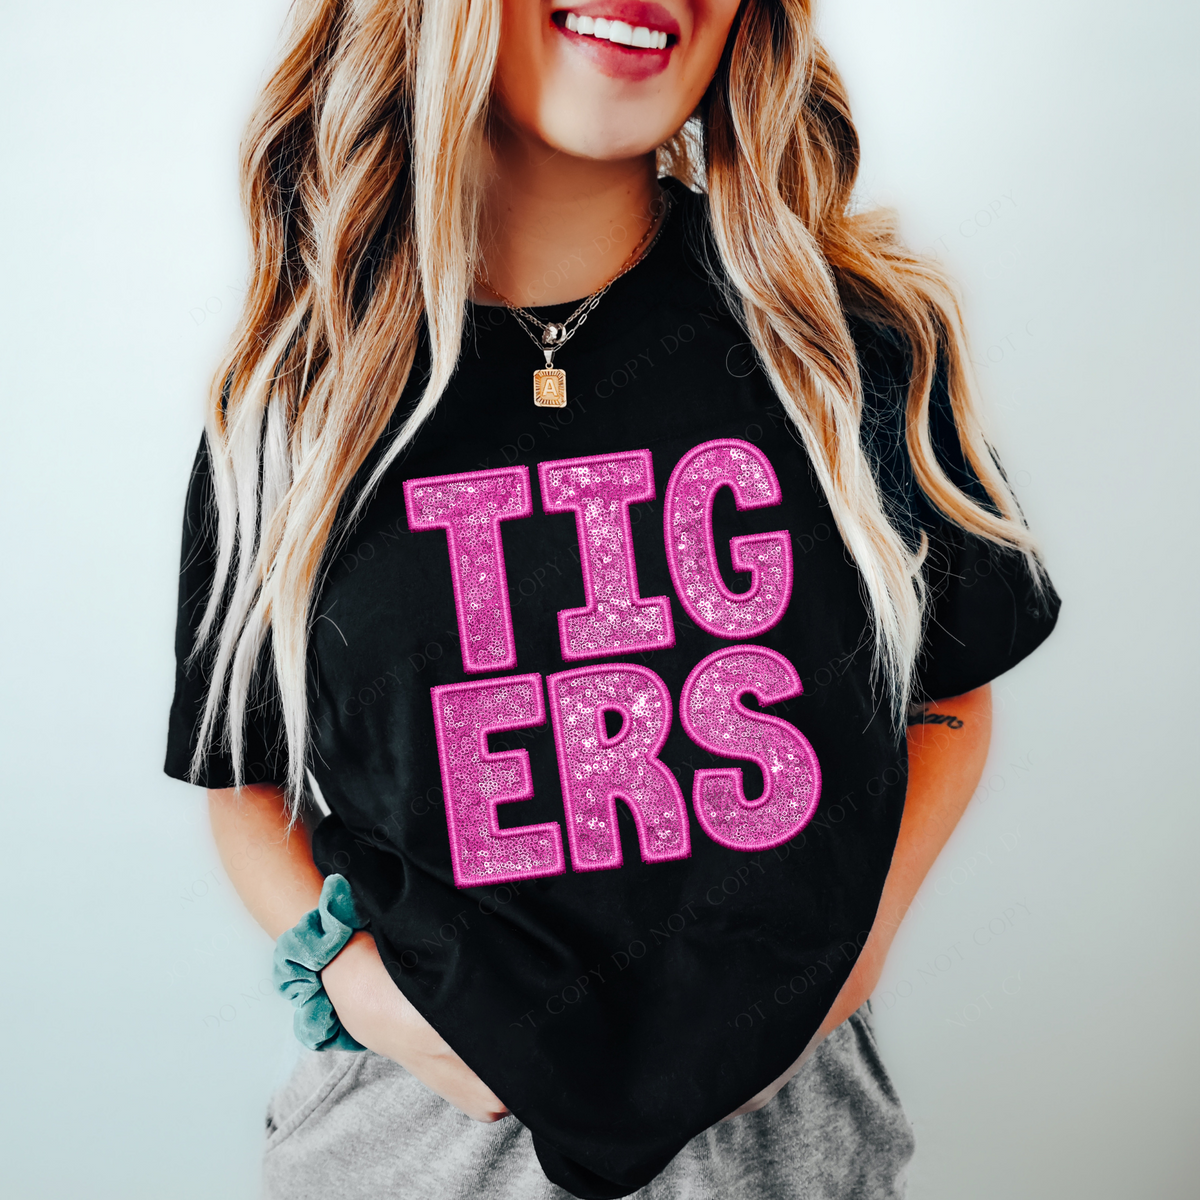 Tigers Embroidery & Sequin in Pink Mascot Digital Design, PNG